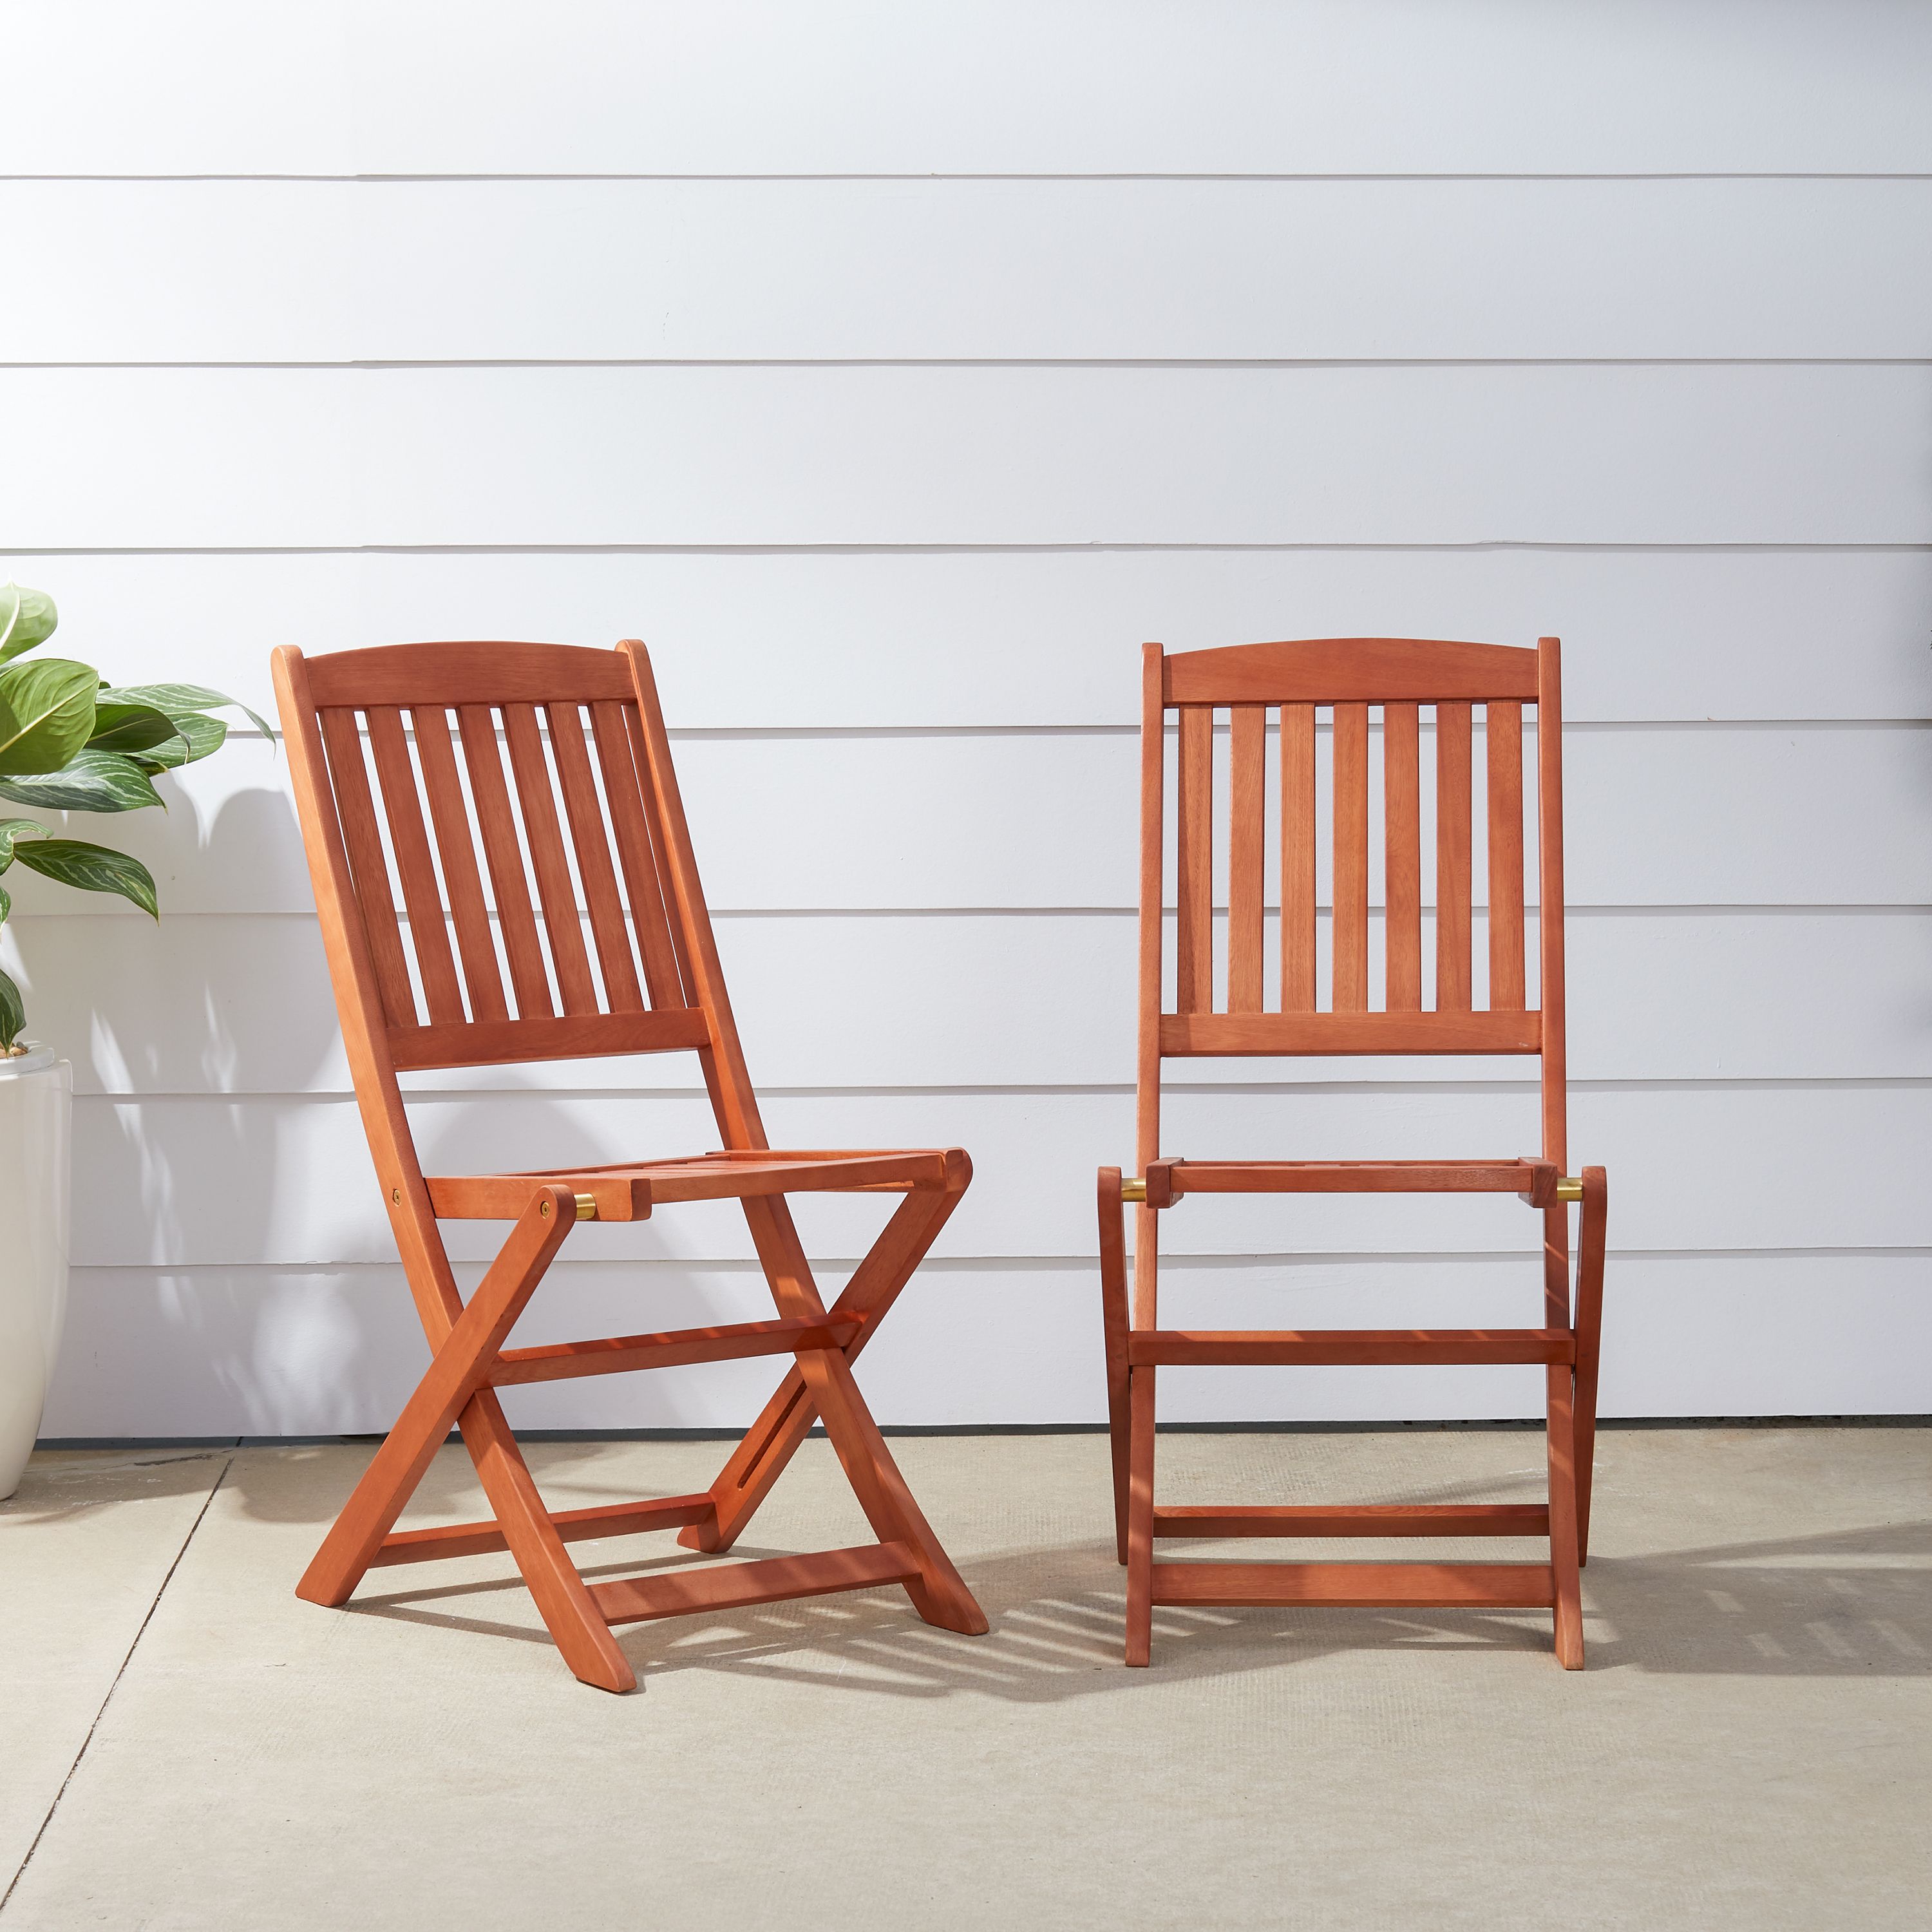 Malibu Outdoor Patio 3-Piece Wood Dining Set with Folding Chair - image 1 of 6